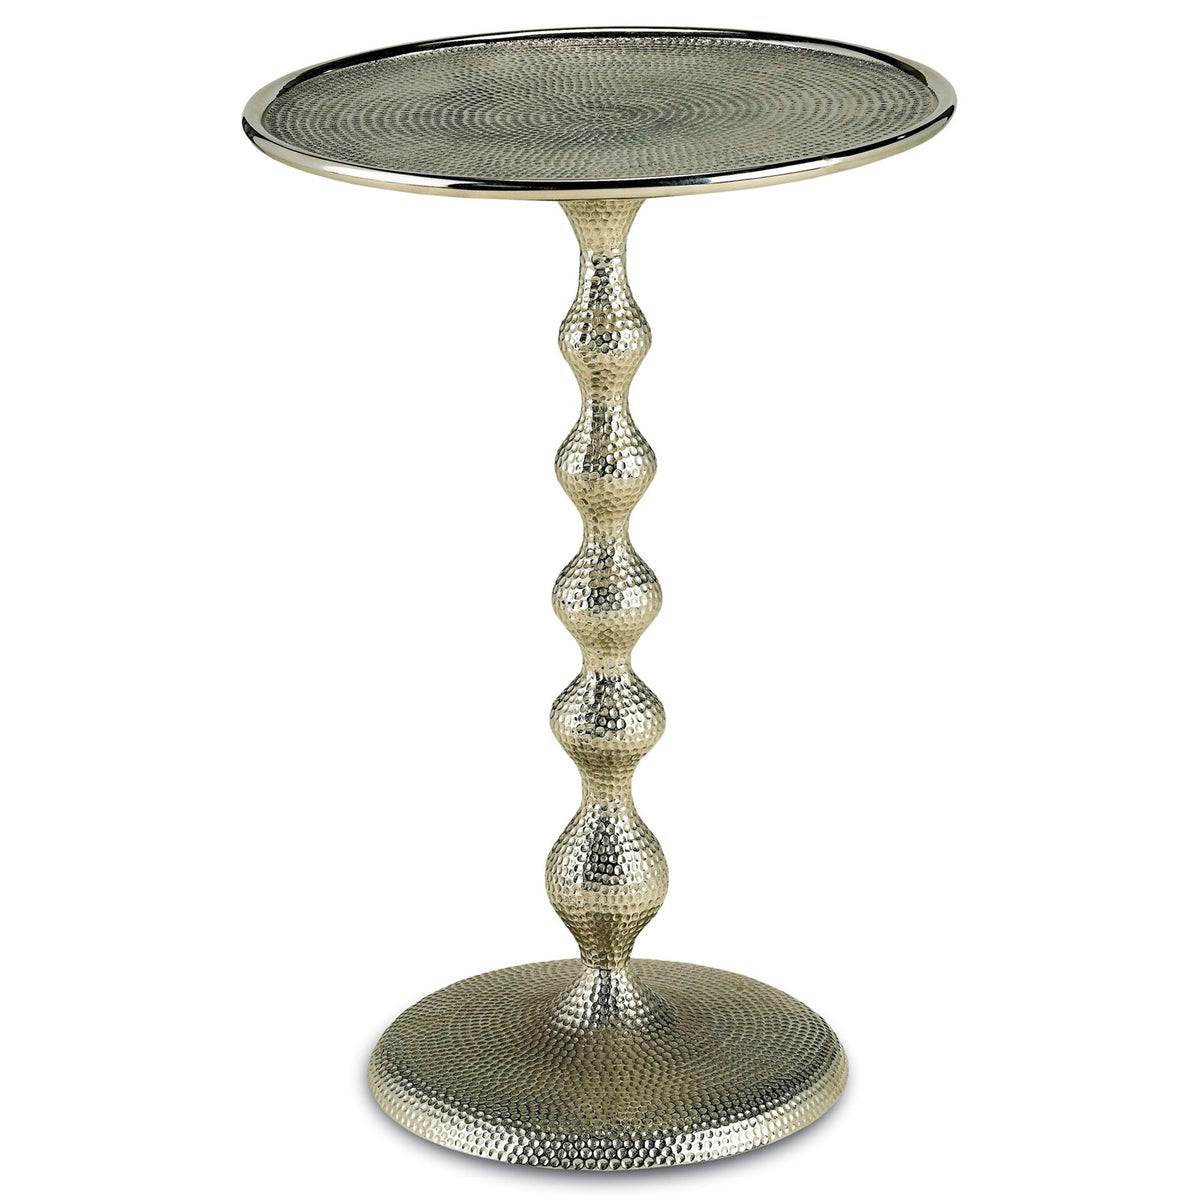 Hookah Accent Table